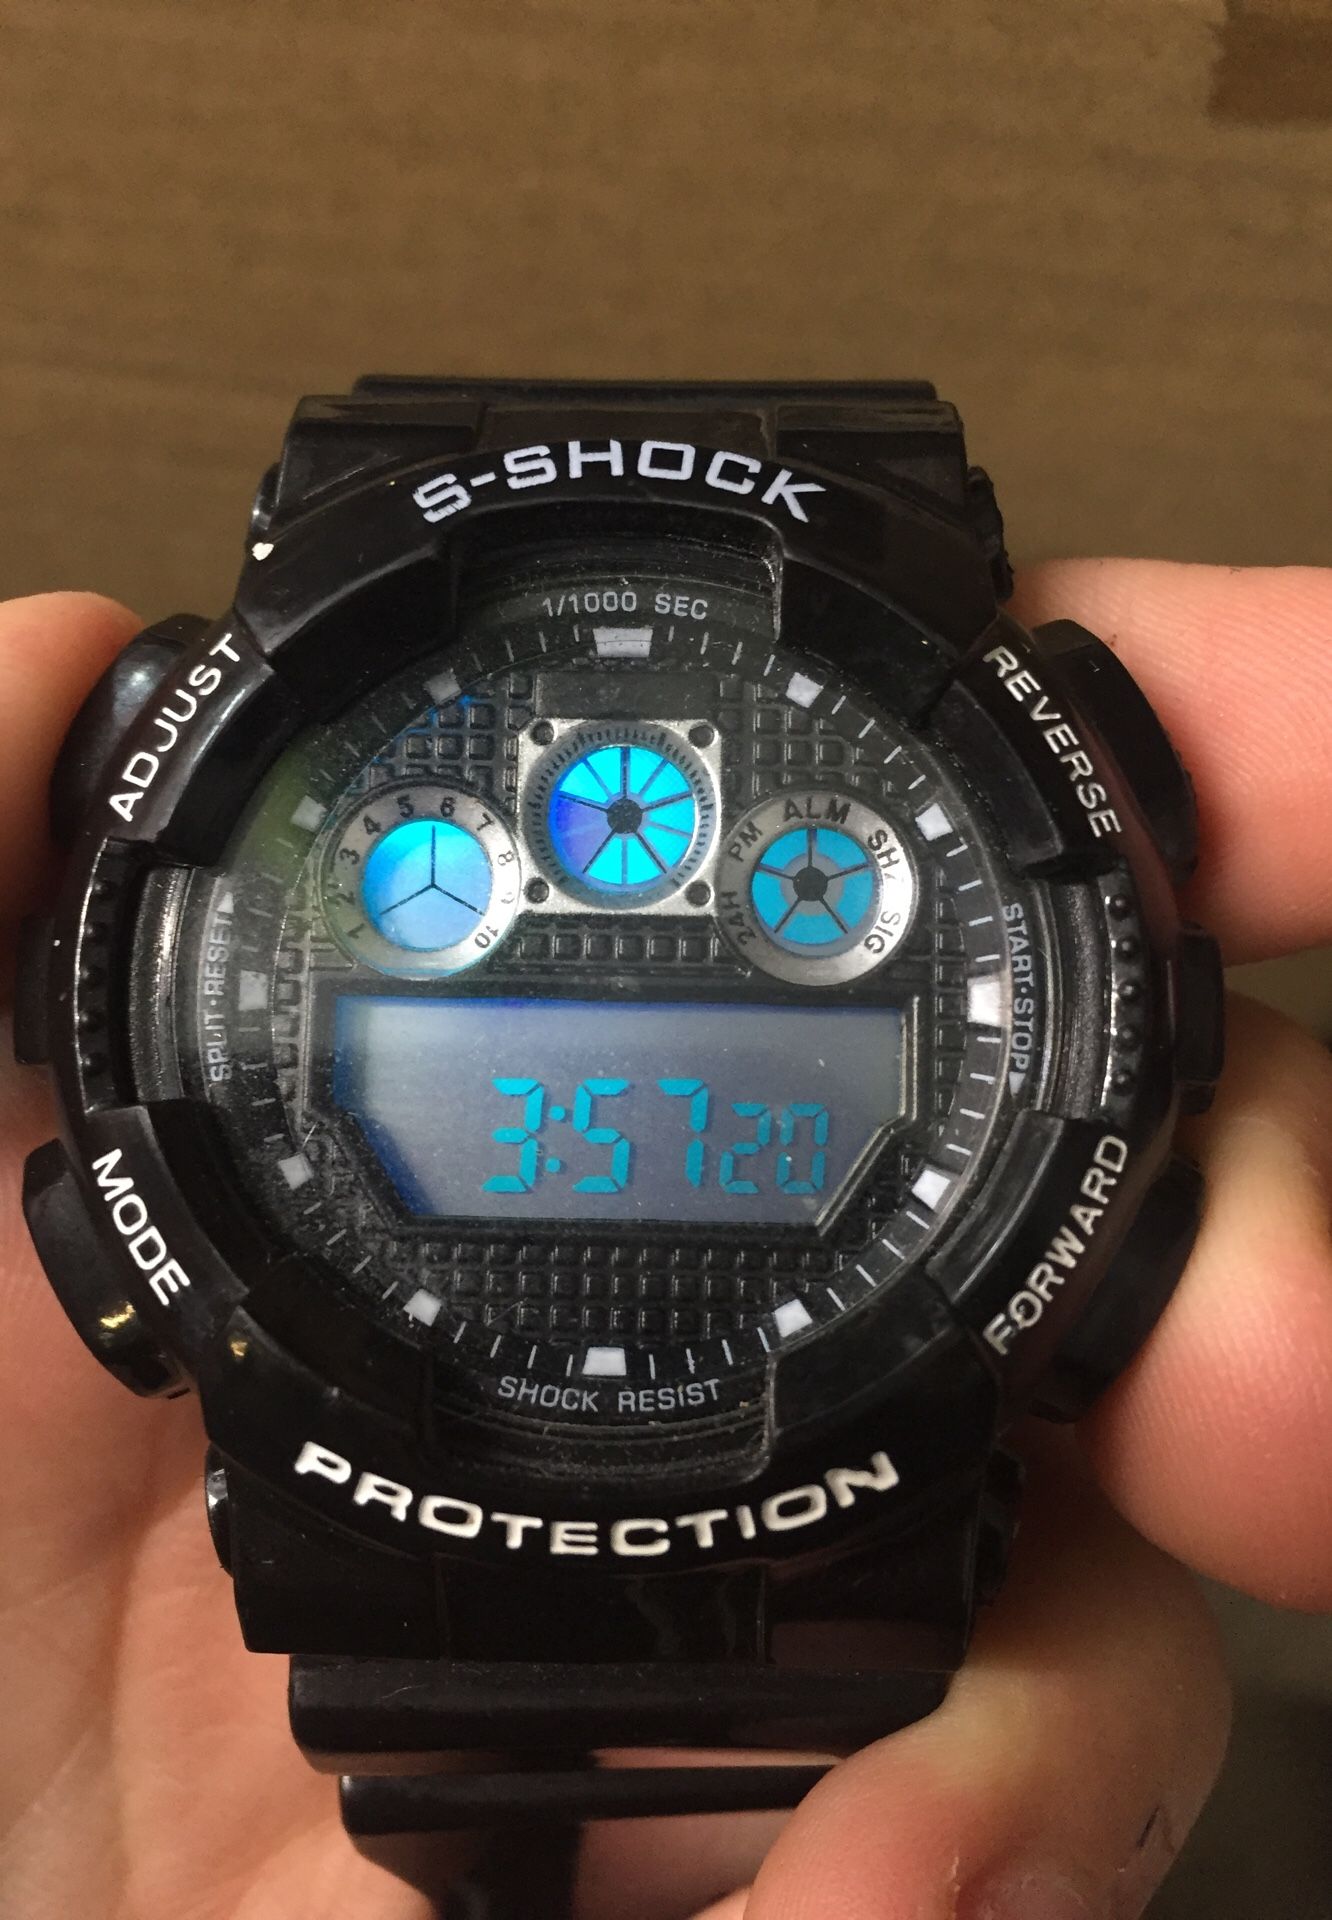 S-Shock Protection Watch // Works good // New battery // Black color // Barely used